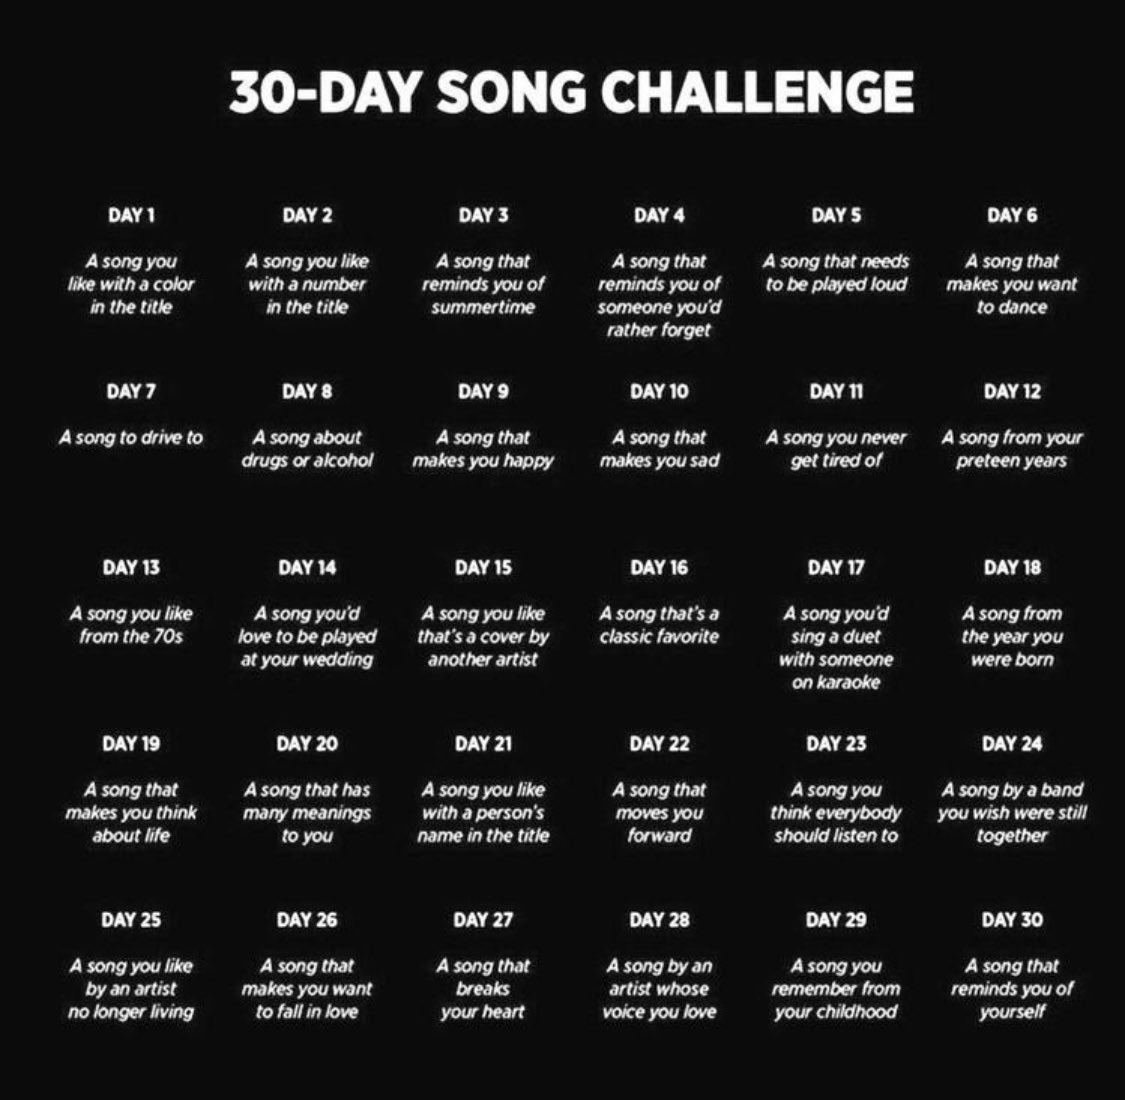 Matt Greenwell 30daysongchallenge I M Doing 33 Days W 3 New Categories You Ll Never Be Rid Of Me Day 27 Heartbreaking Song I Choose Angel Voiced Alison Krauss Brad Paisley